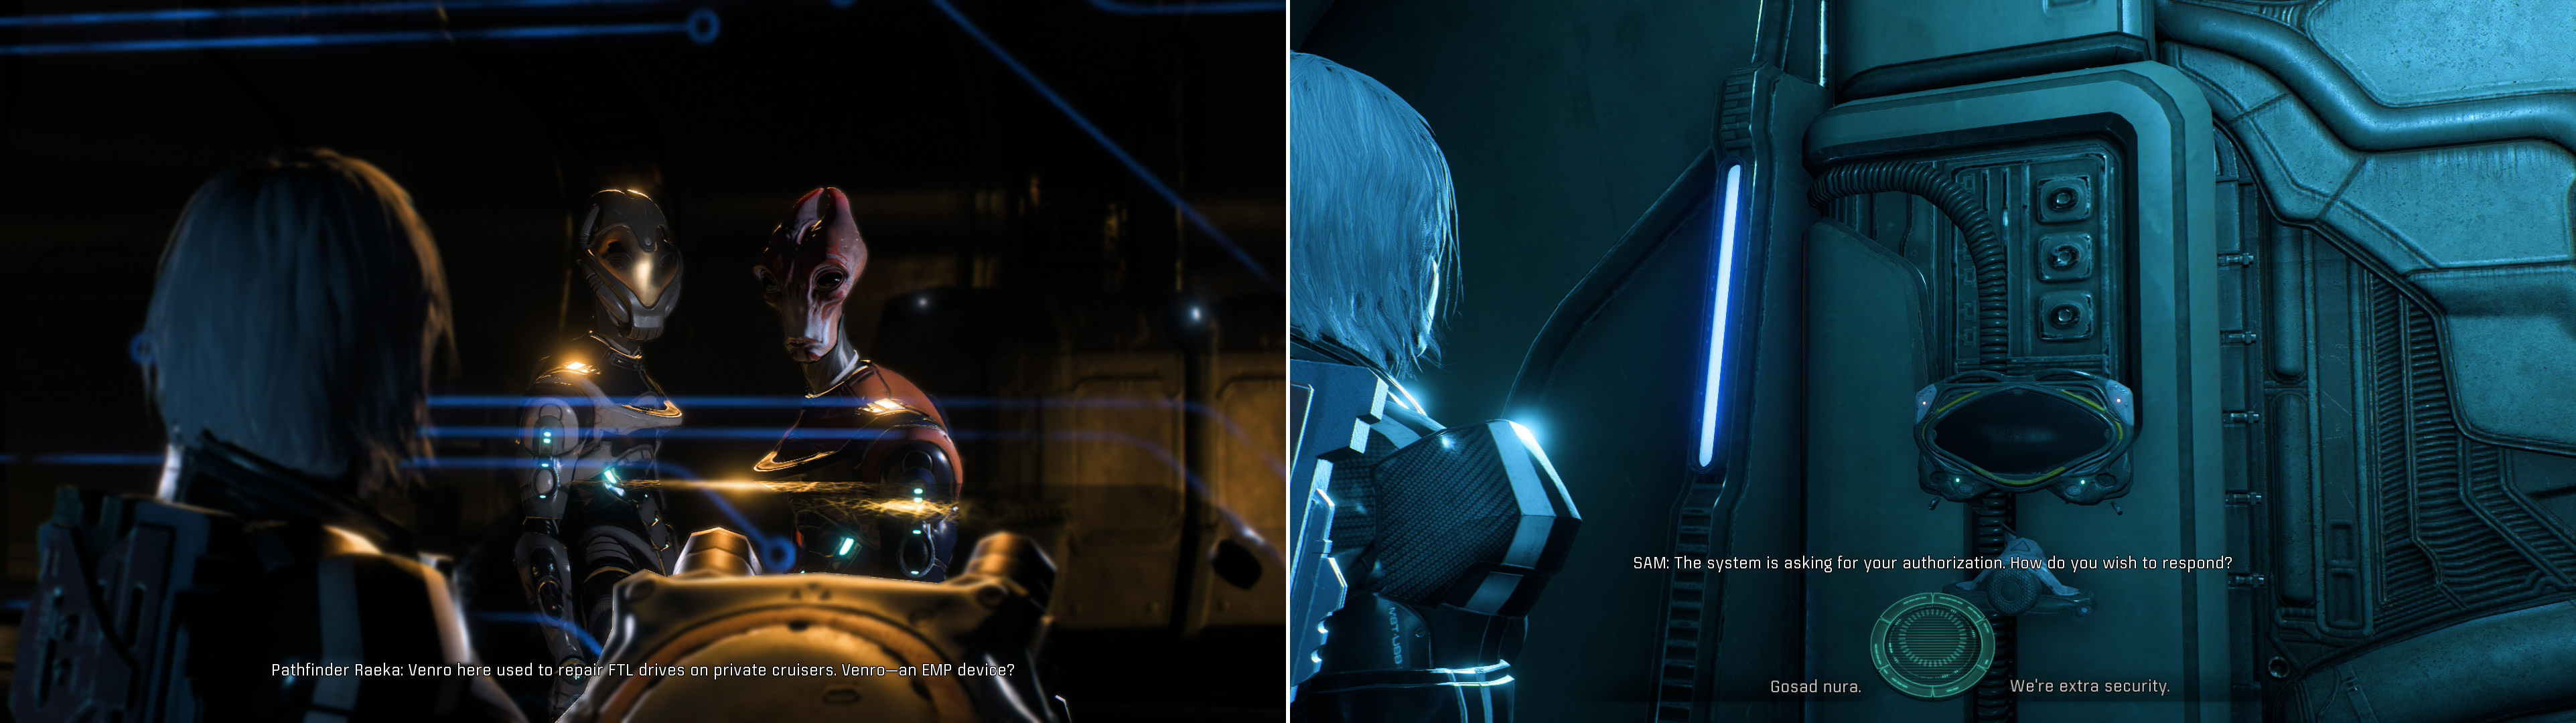 Rendezvous with Pathfinder Raeka, who fortunately has a solution for the Ketts superior firepower (left). To get deeper into the flagship, youll need to use SAM to imitate Kett vocalizations (right).